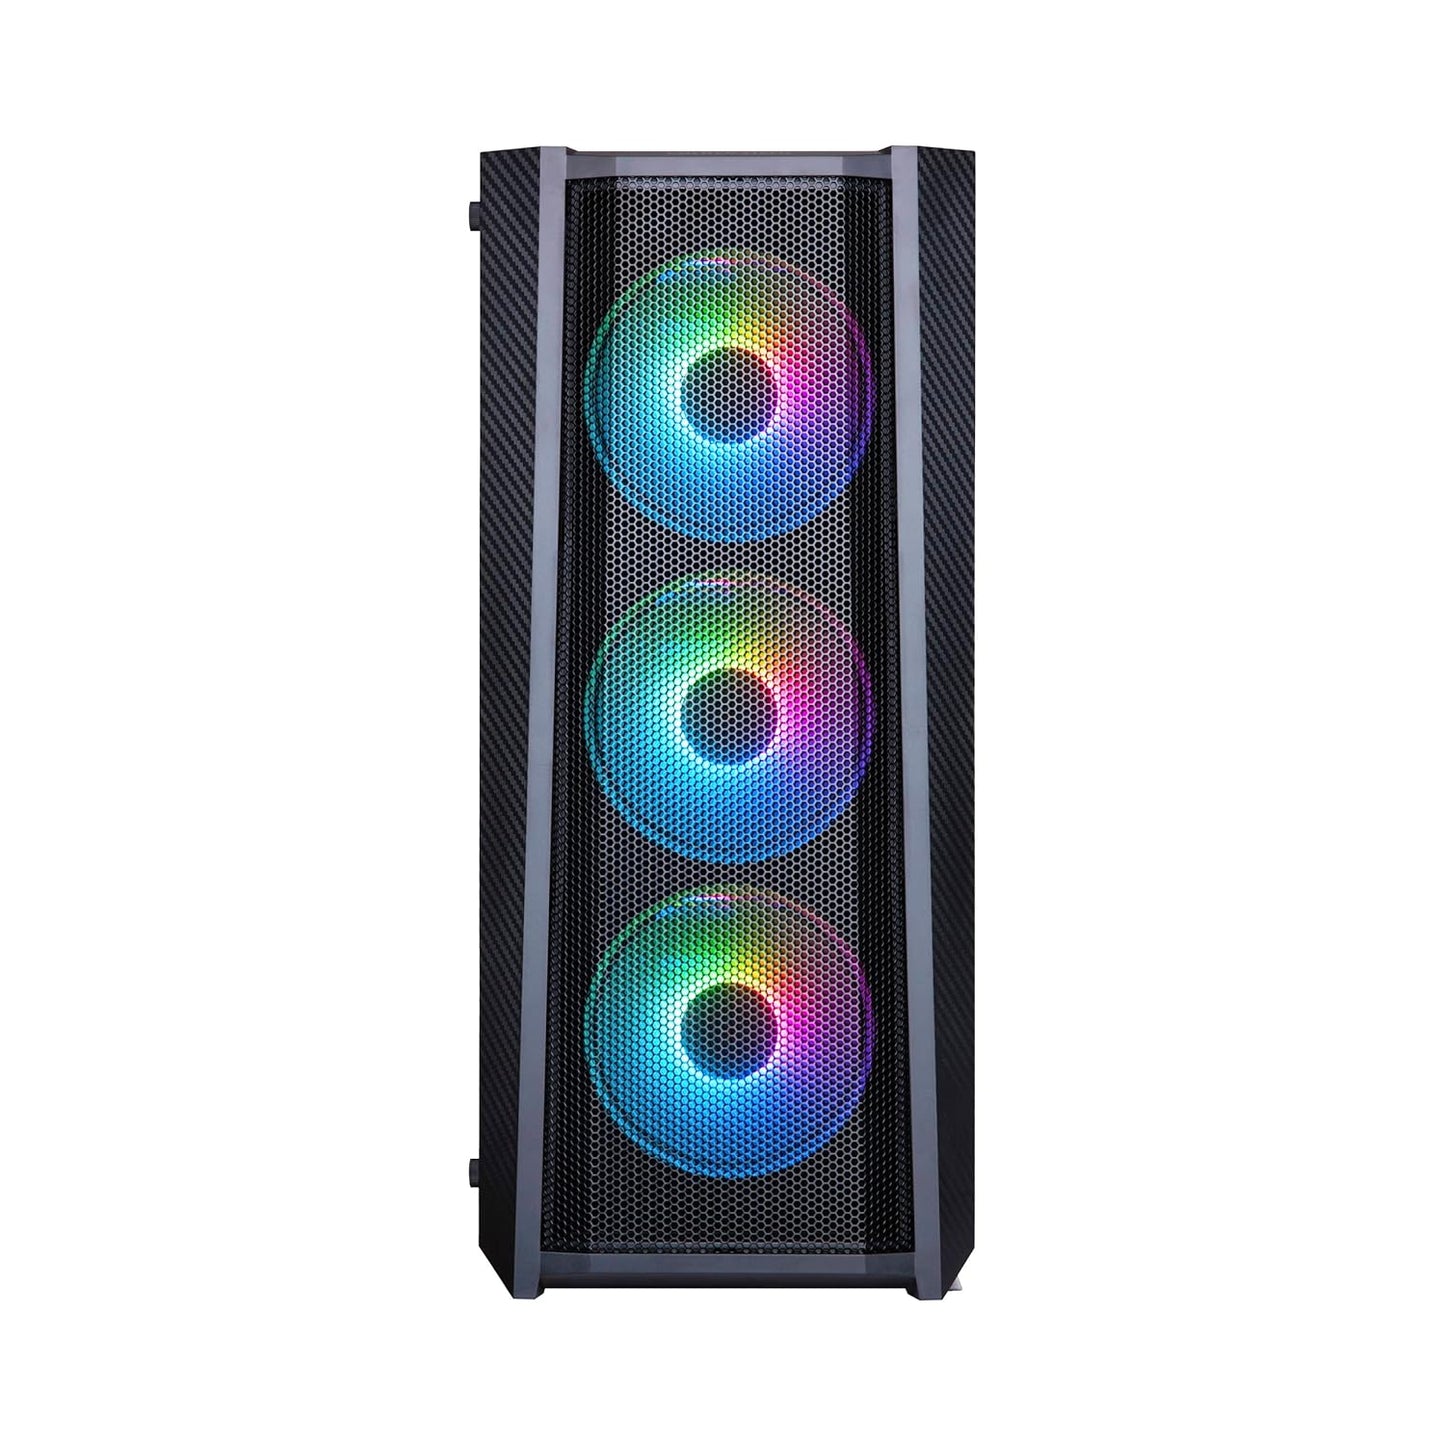 Ant Esports ICE-311MT ATX Cabinet with 3x120mm Fan Support